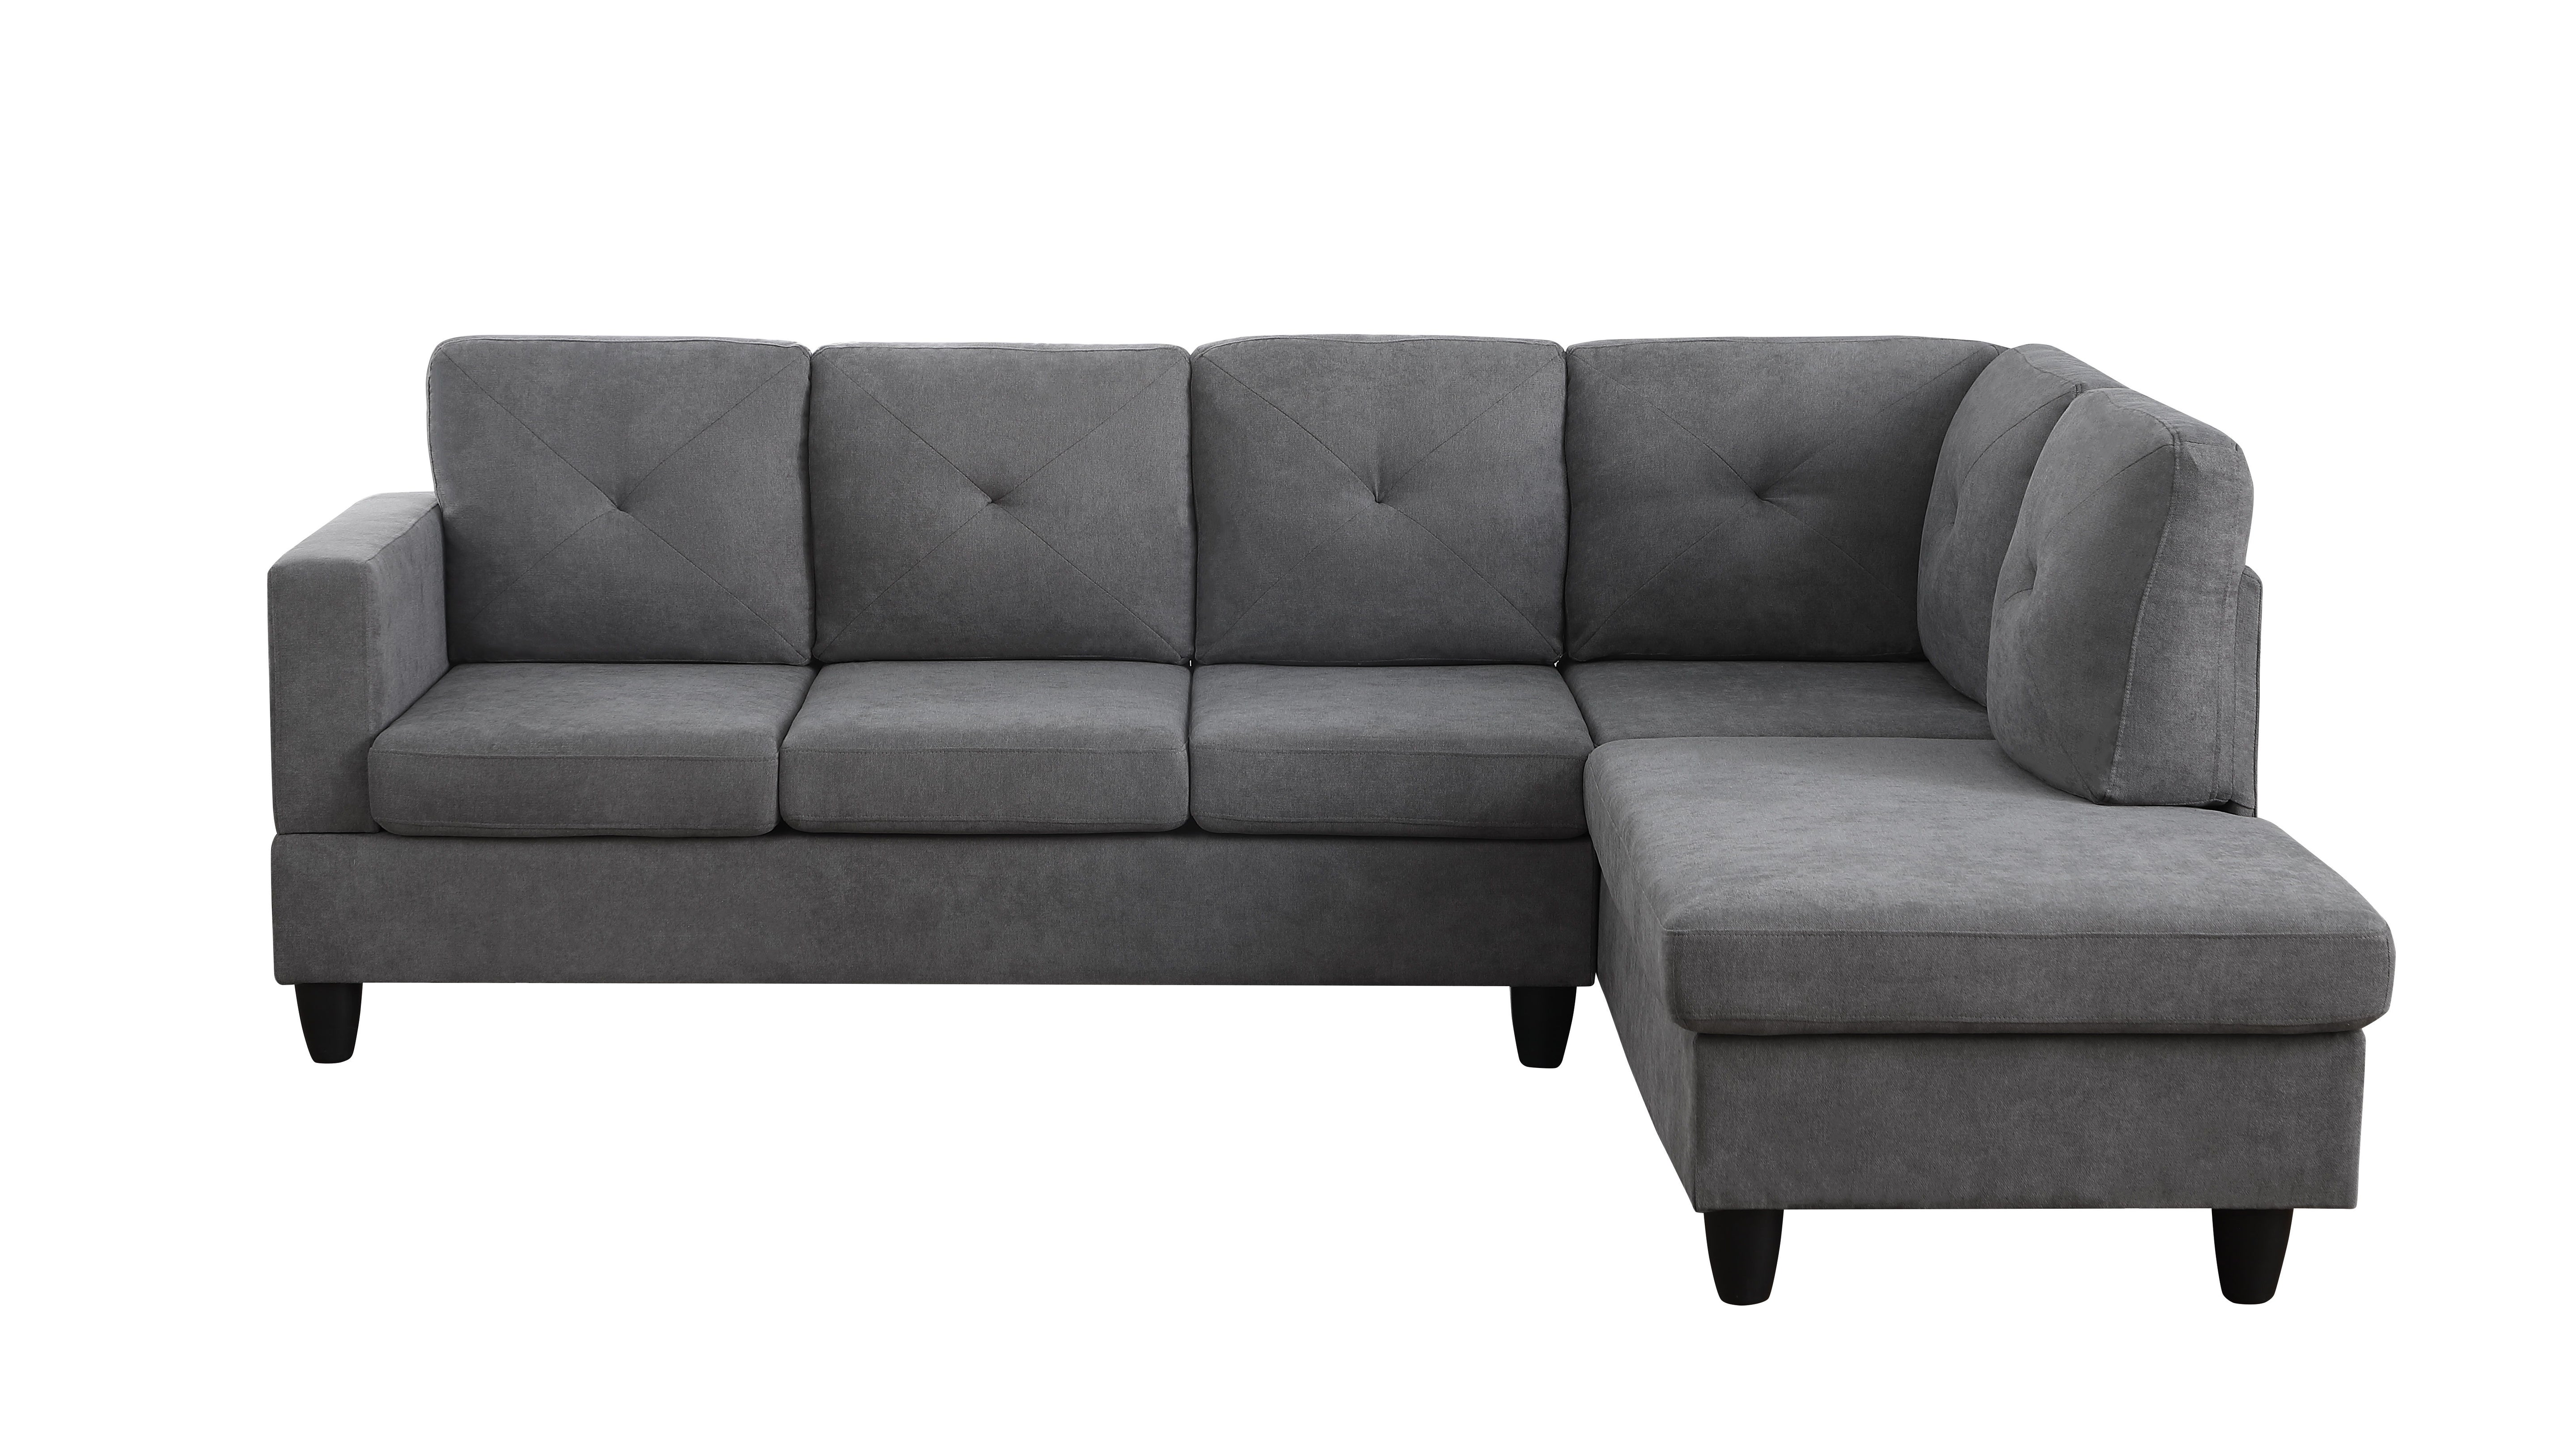 Ivan - Woven Sectional Sofa With Right Facing Chaise - Dark Gray